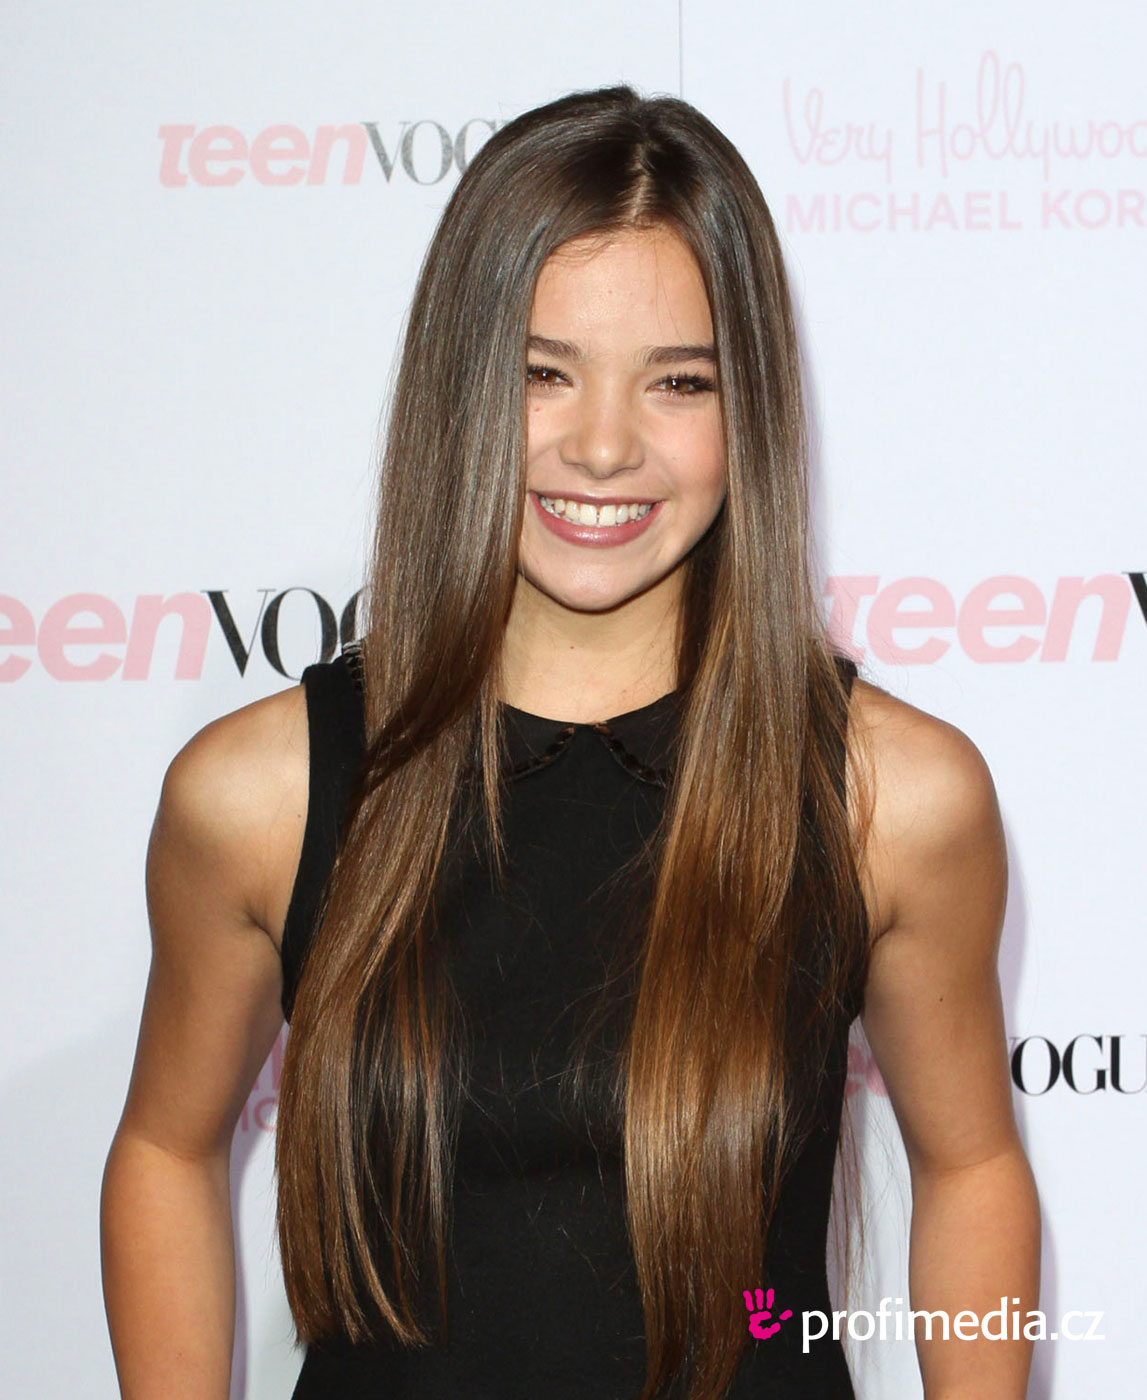 Hailee Steinfeld - Images Actress